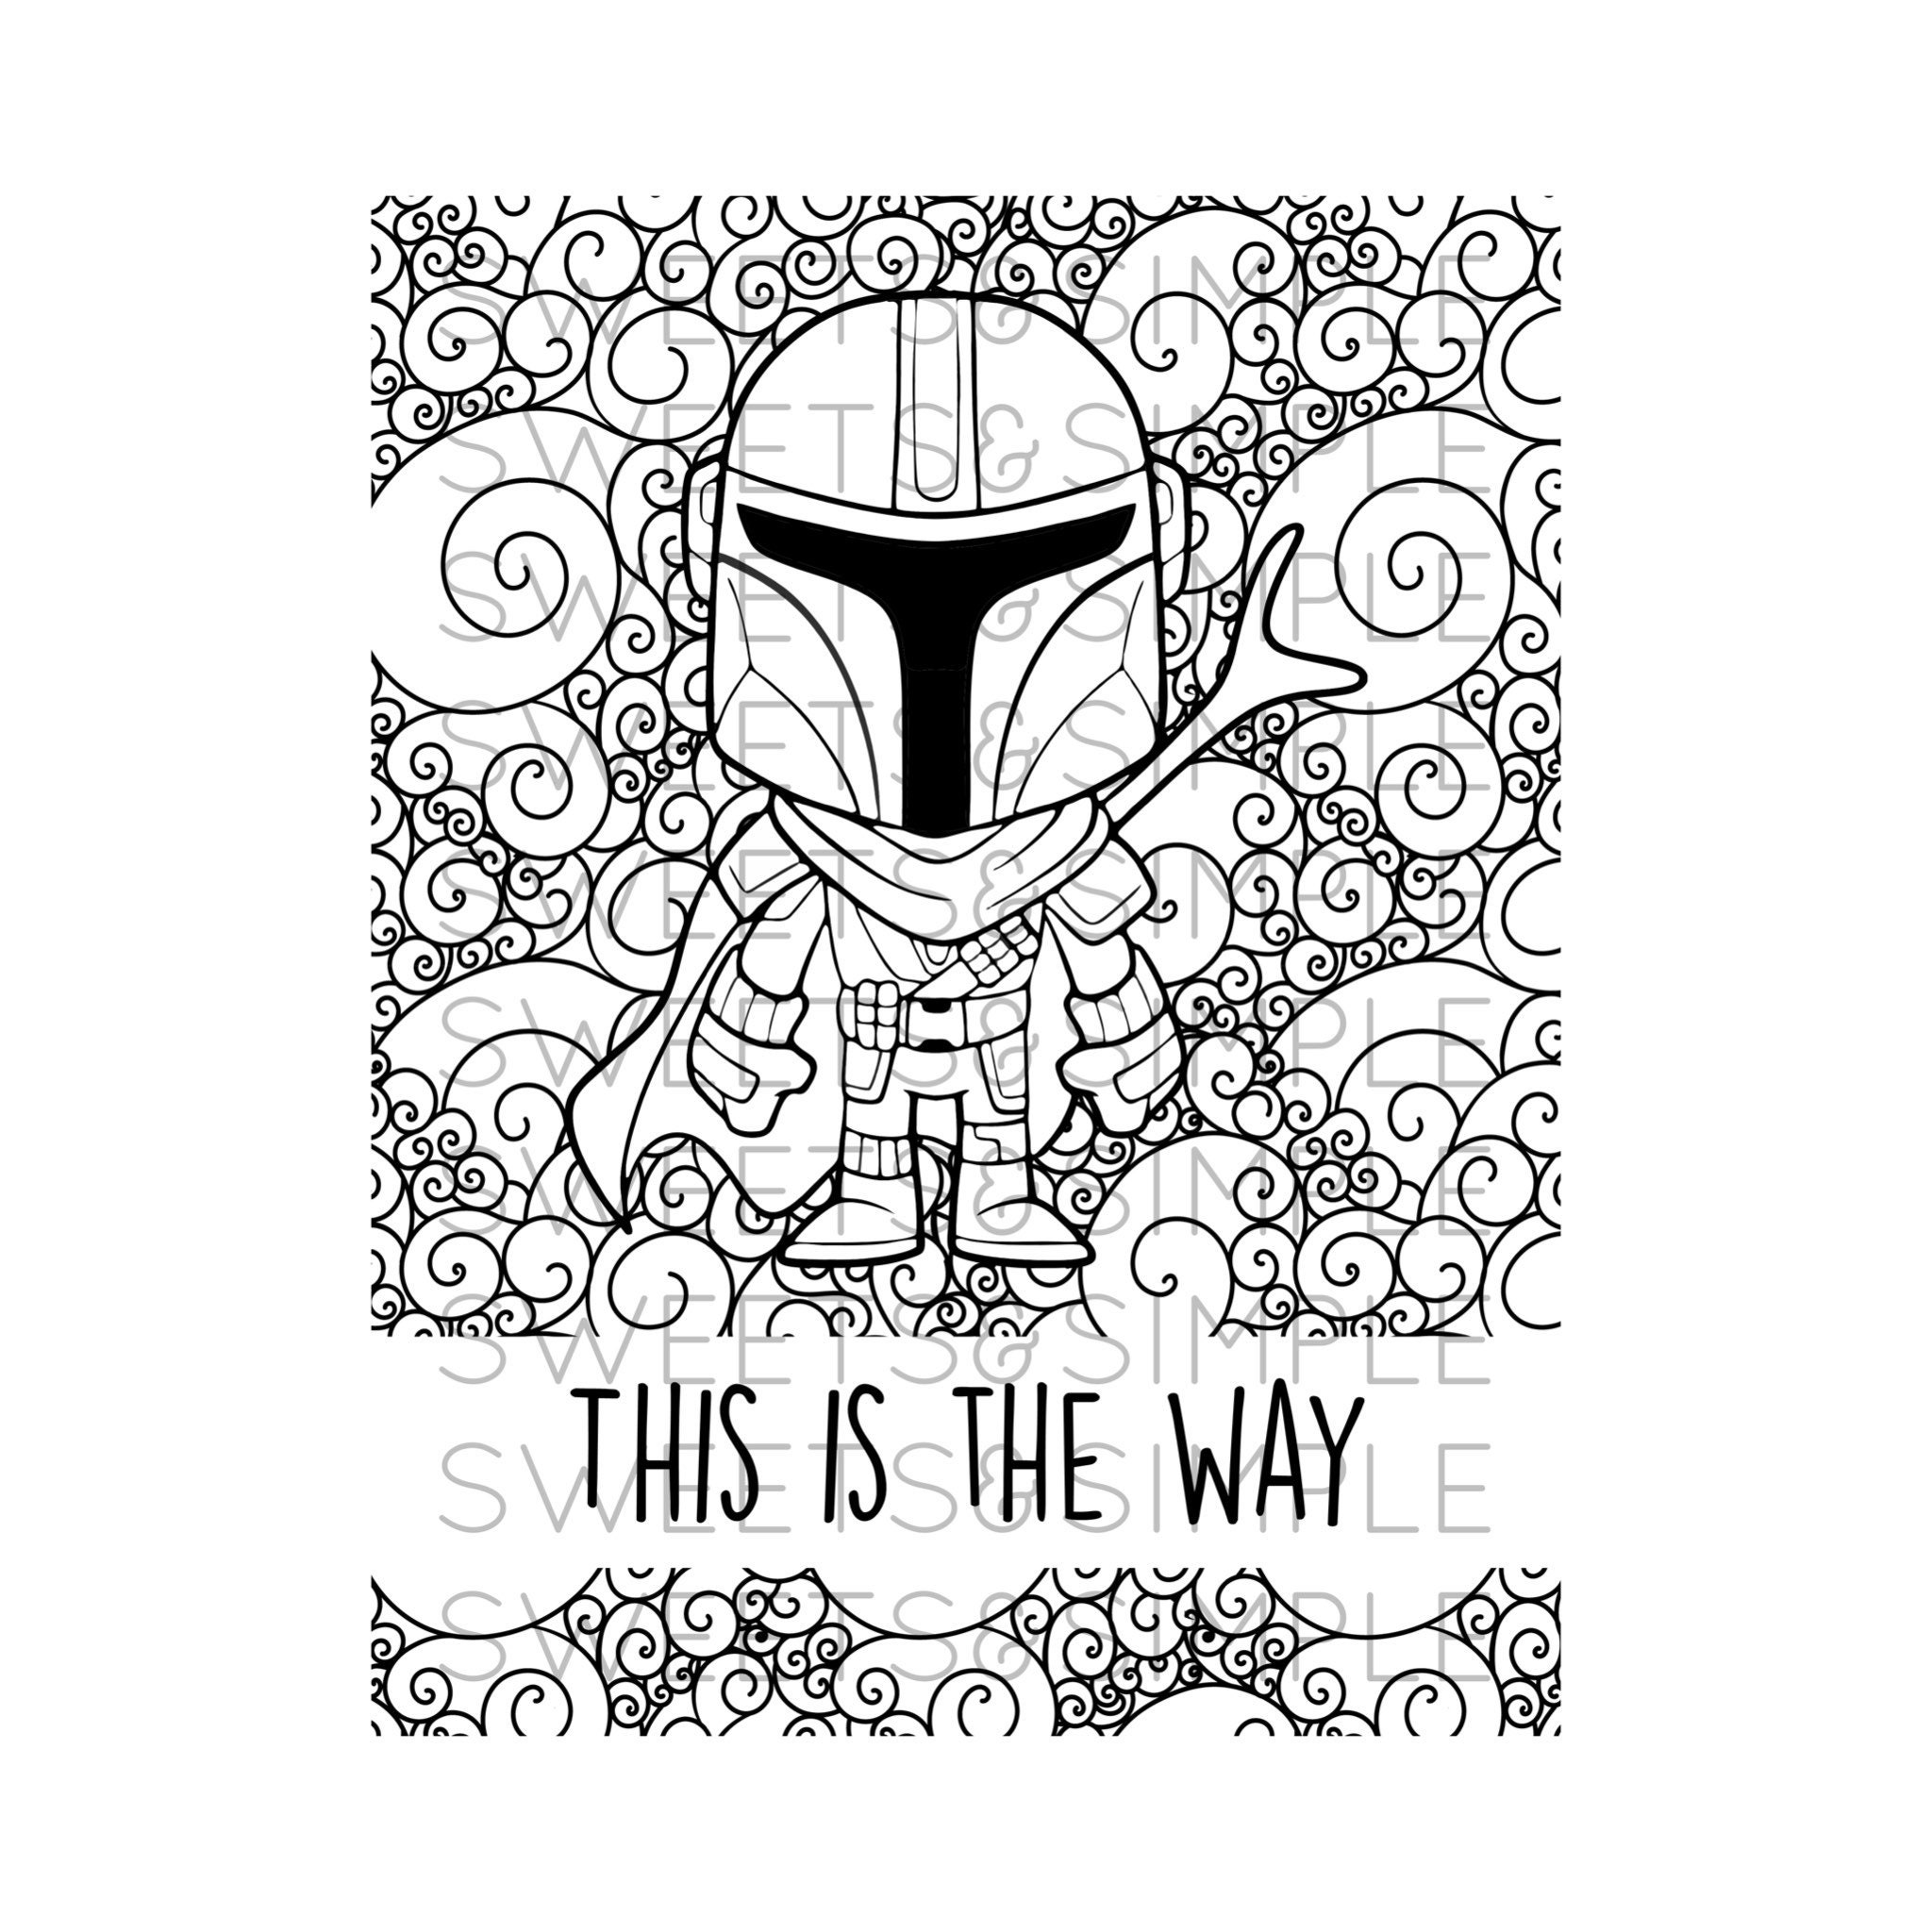 Space Bounty Hunter Coloring Page, Adult Coloring, Coloring Page ...